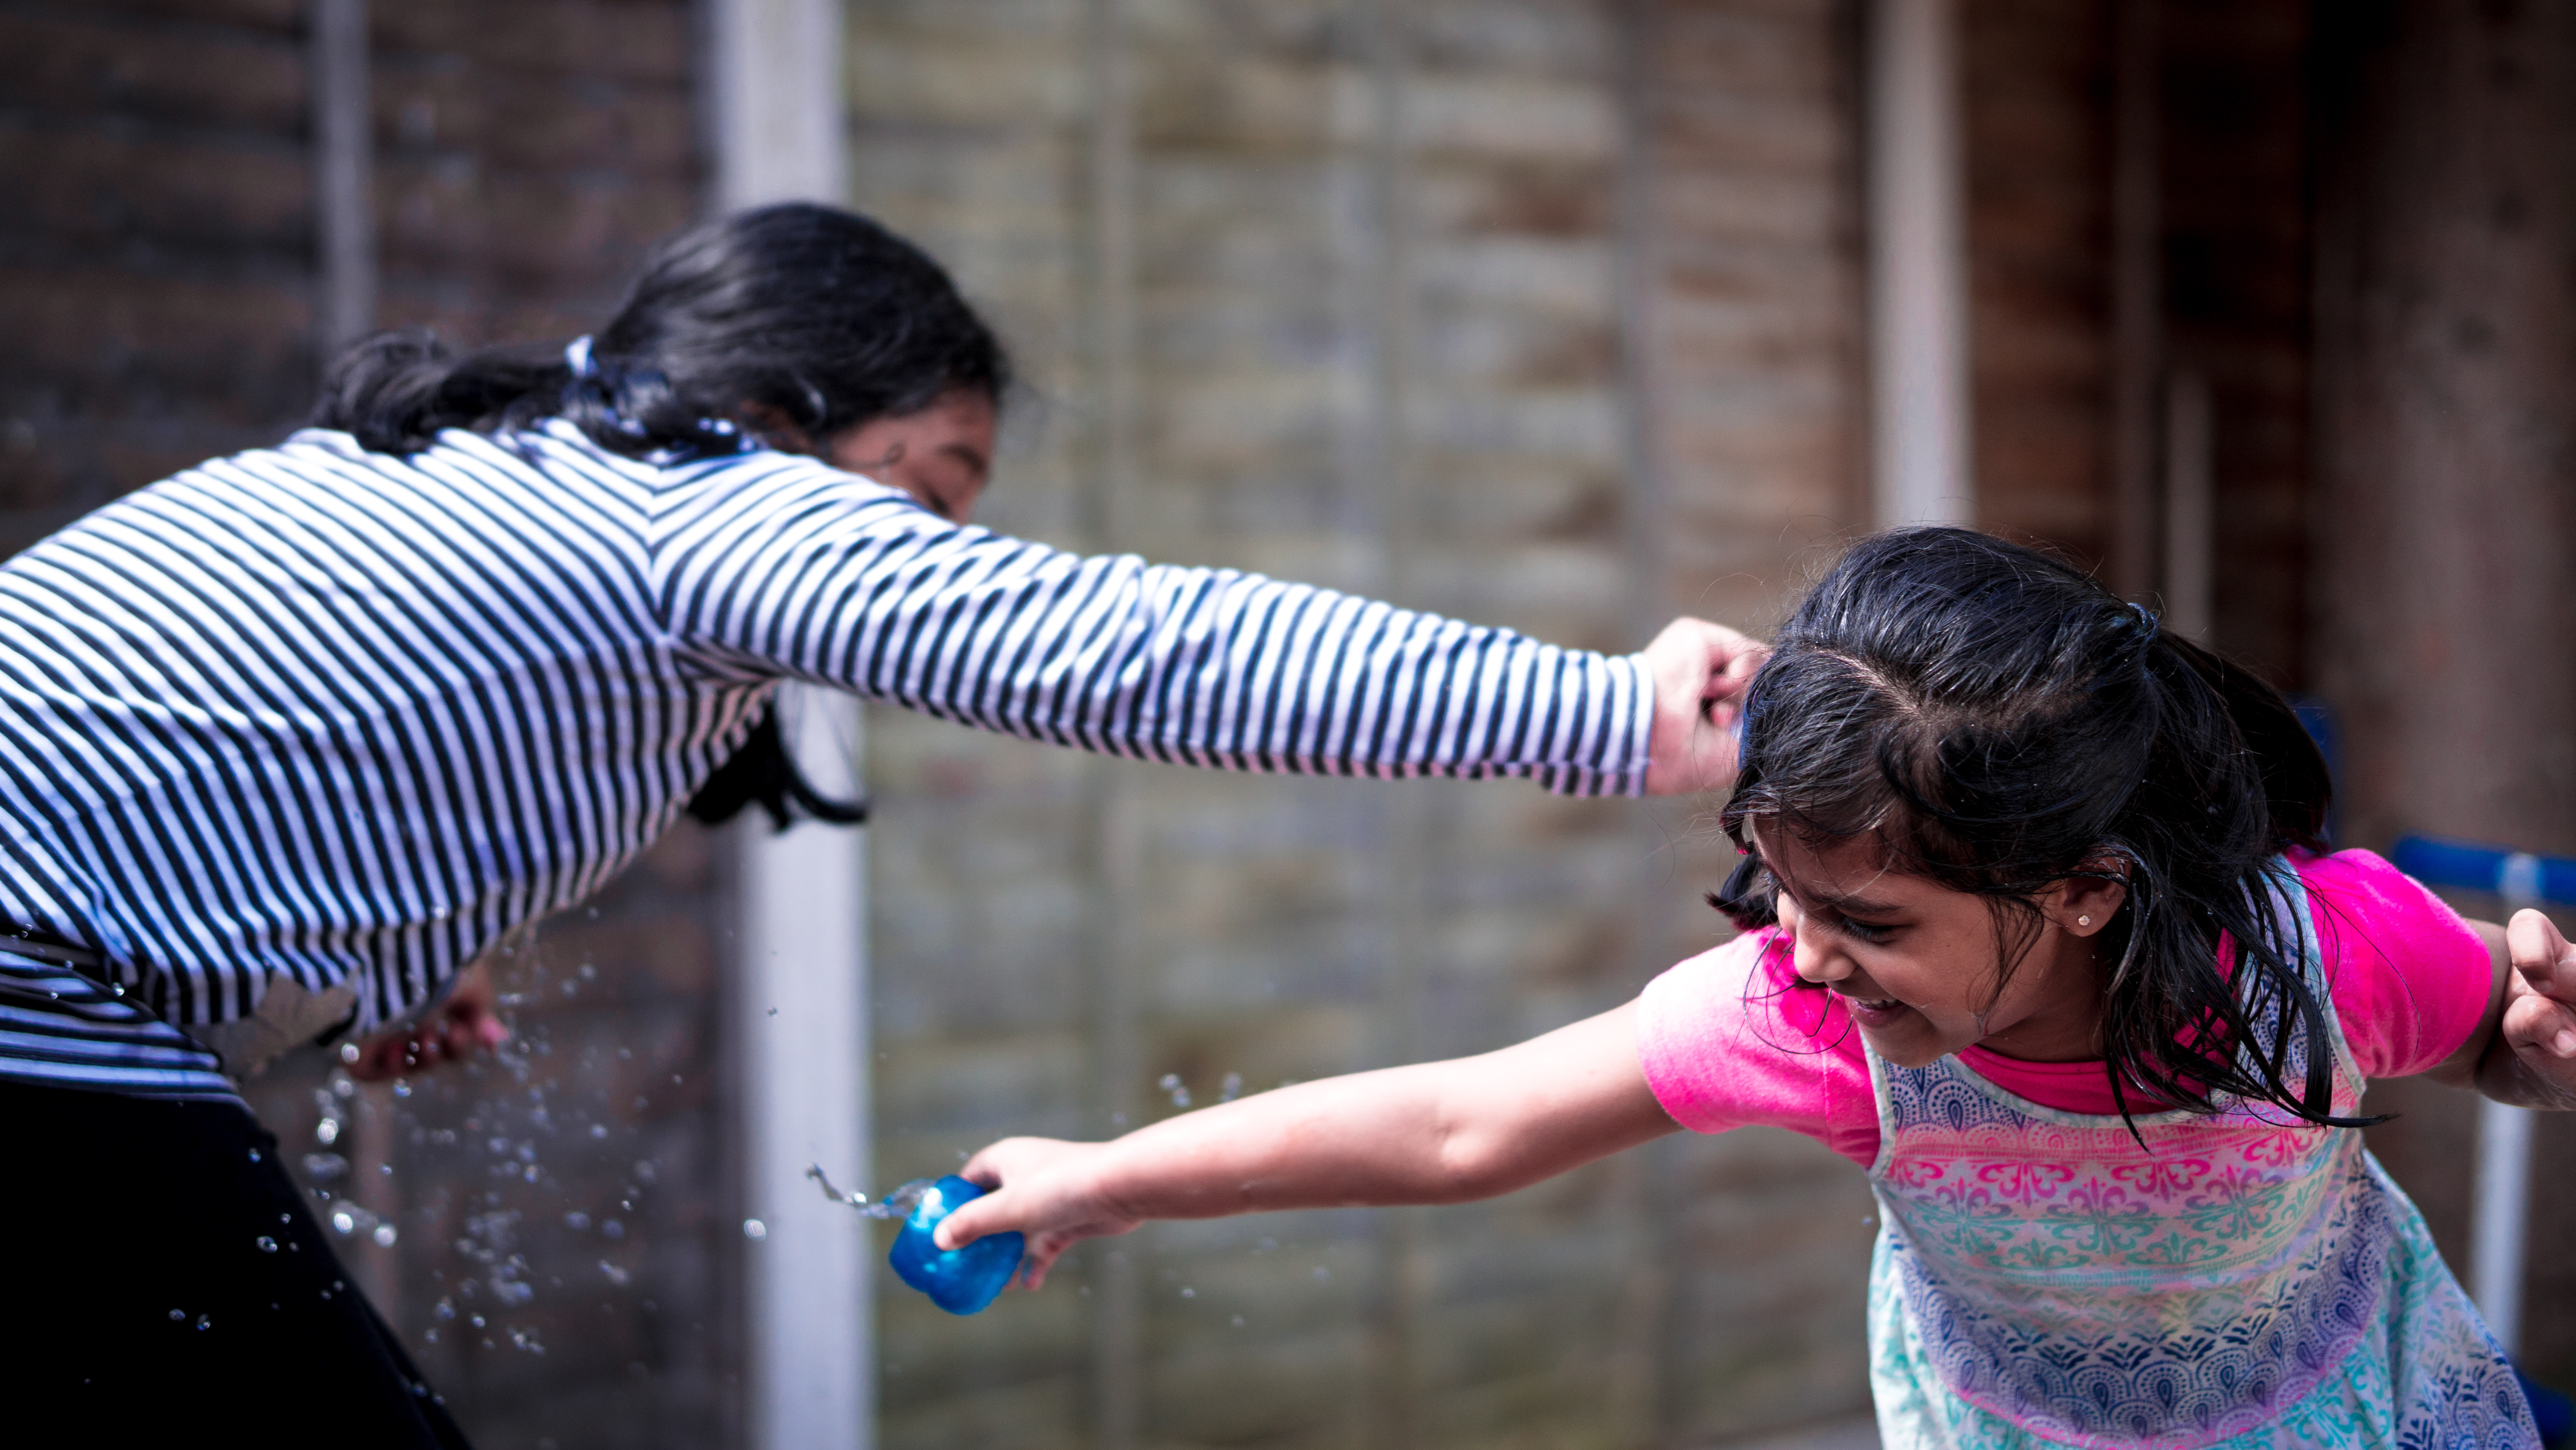 Two girls, one older and one younger, playing with water balloons.